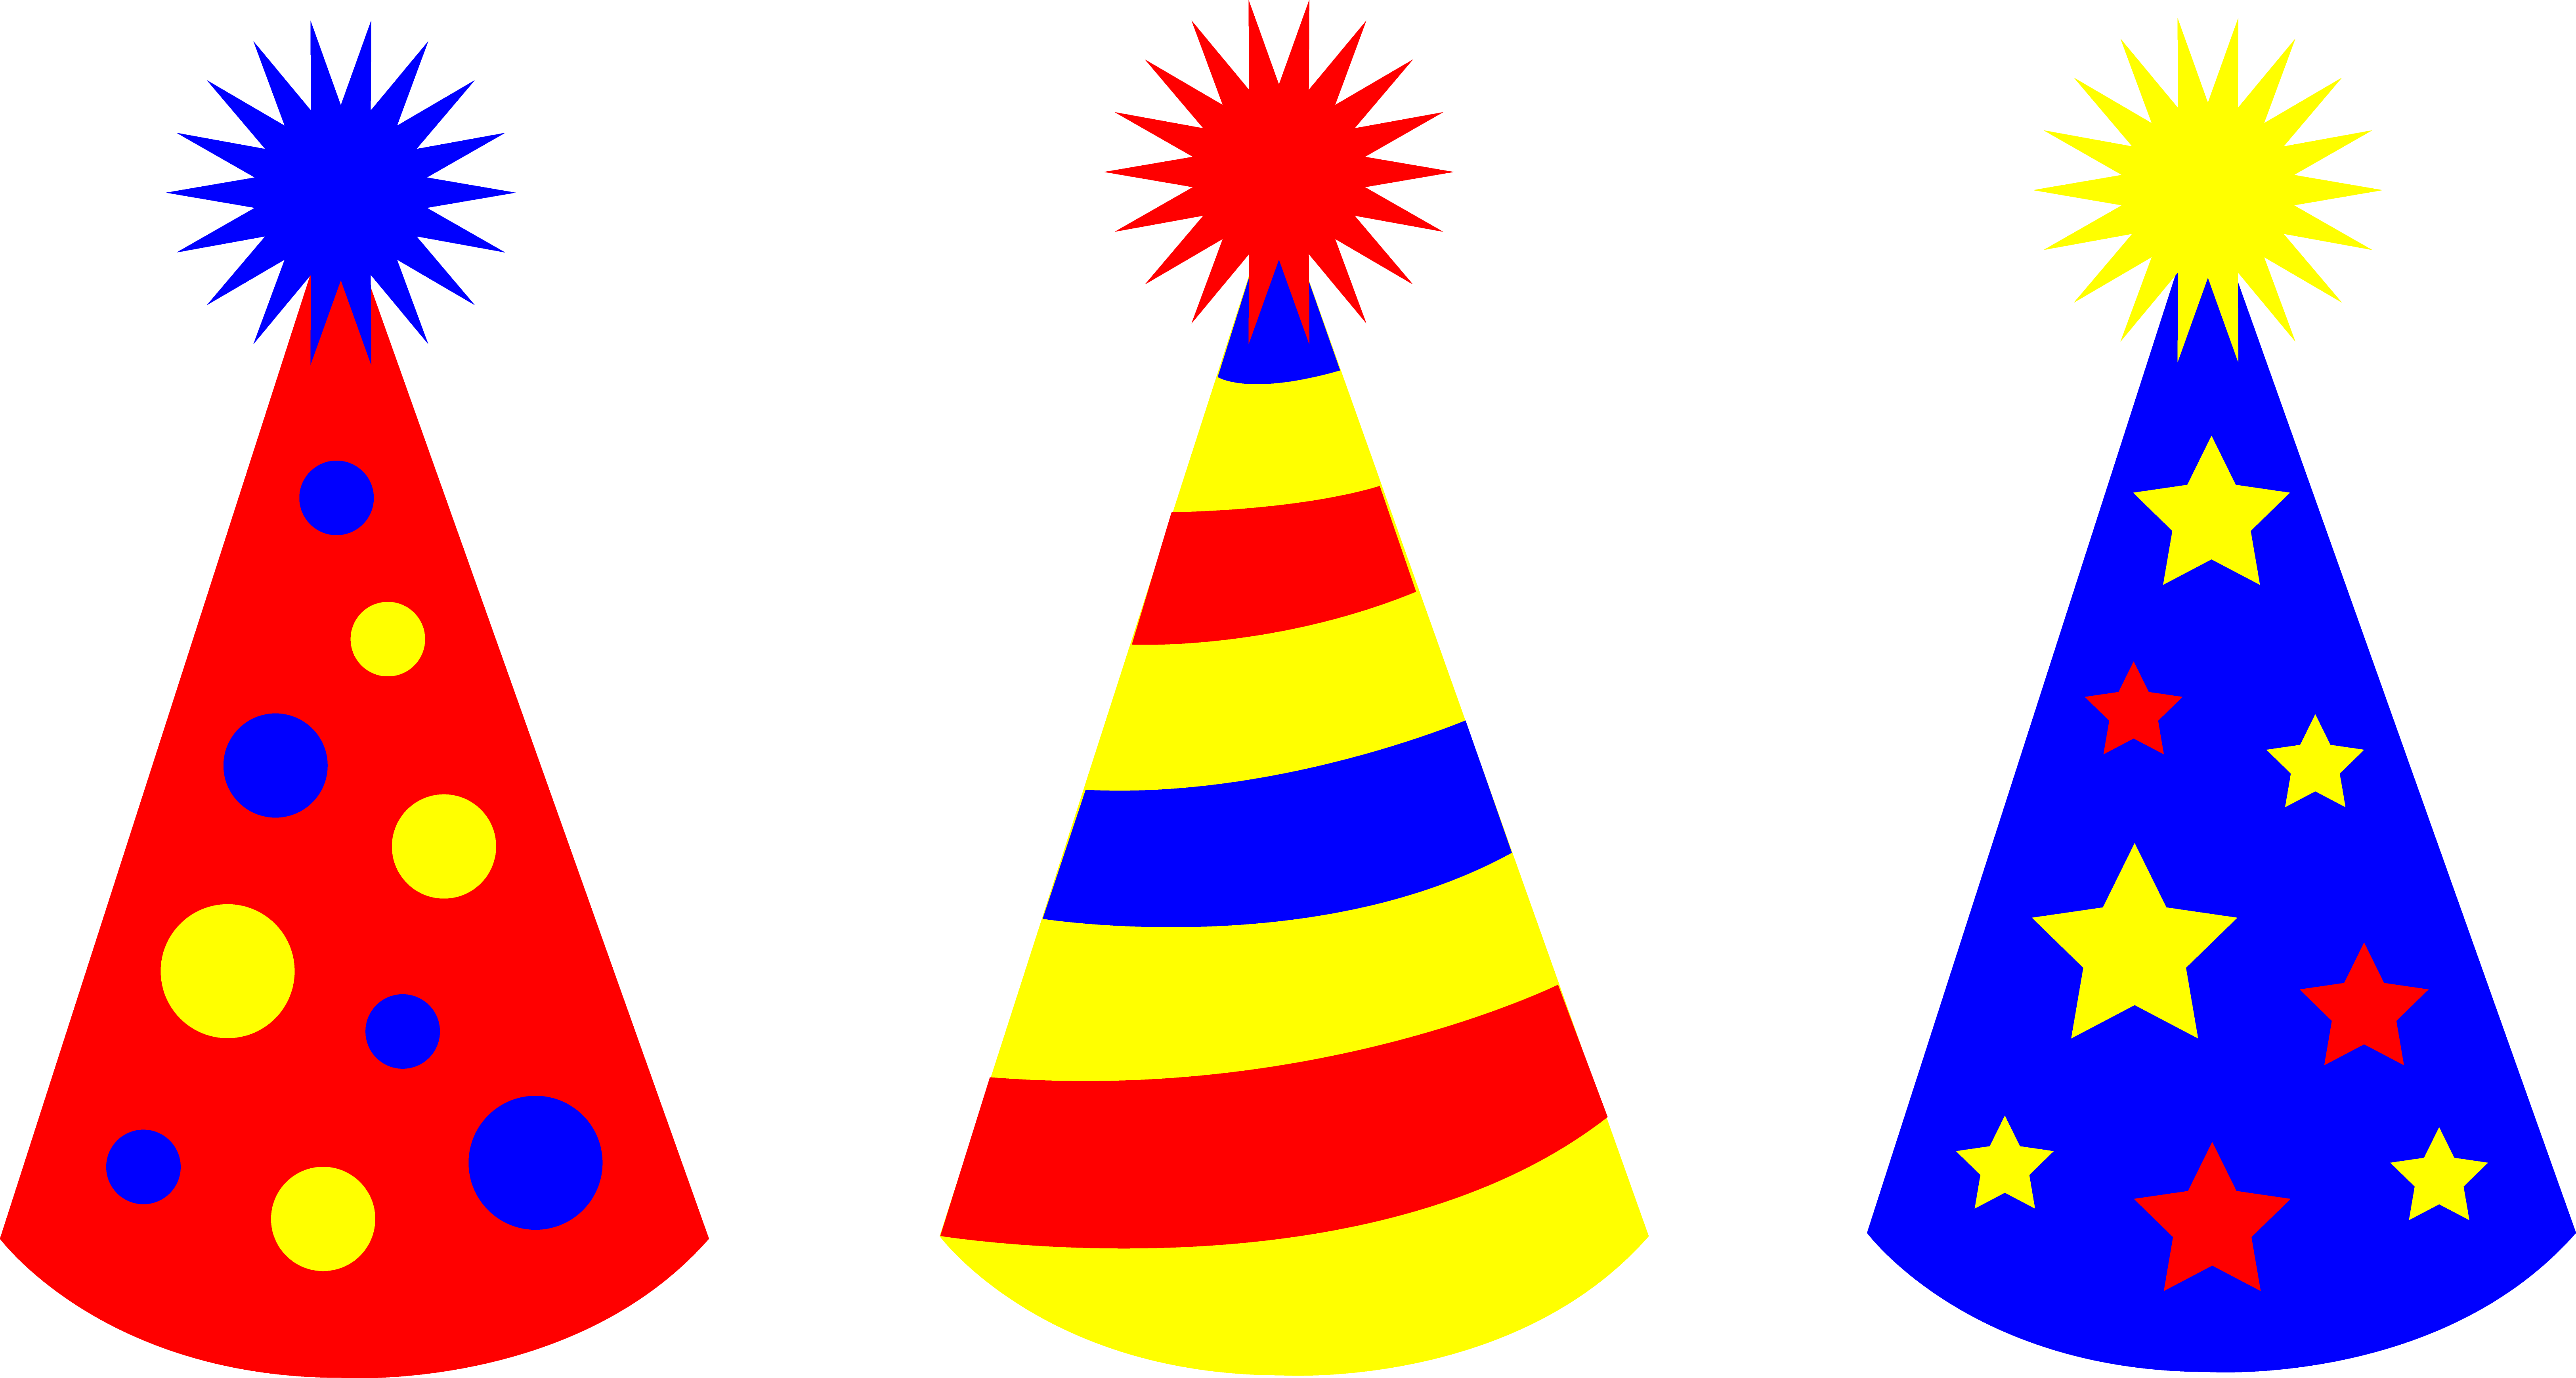 ... Party Hat Clip Art - clipartall ...